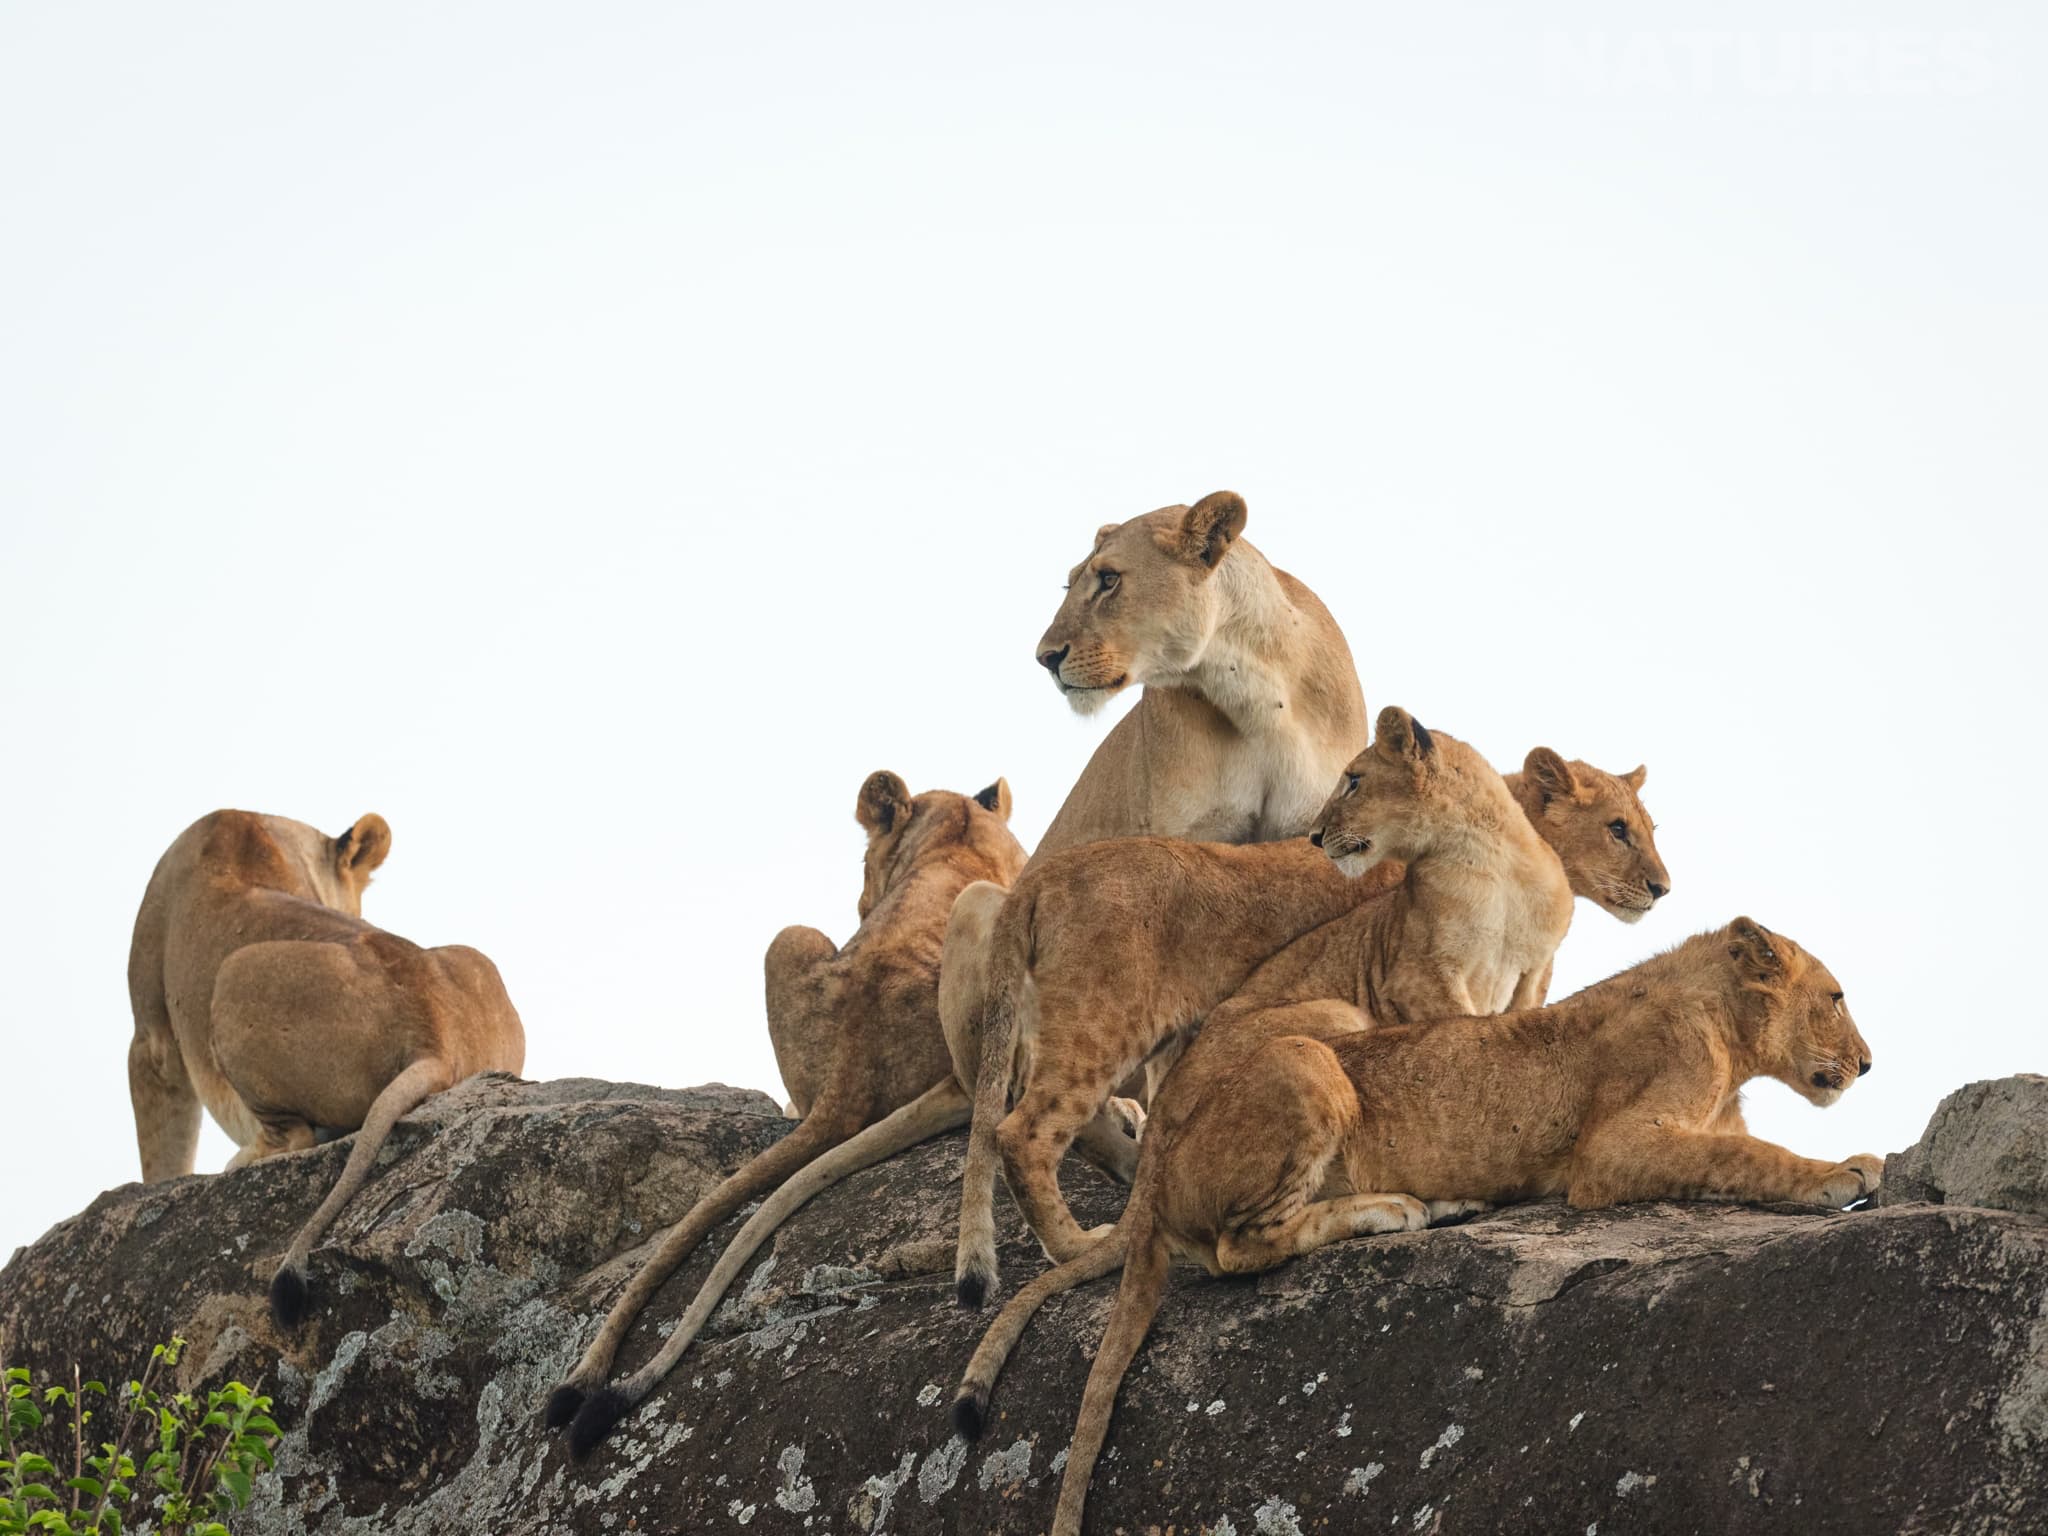 A Small Selection Of The Lobo Pride, The Lions Who Rule The Lobo Region, The Region Of Tanzania That We Use For The Natureslens Wildlife Of The Serengeti Photography Holiday